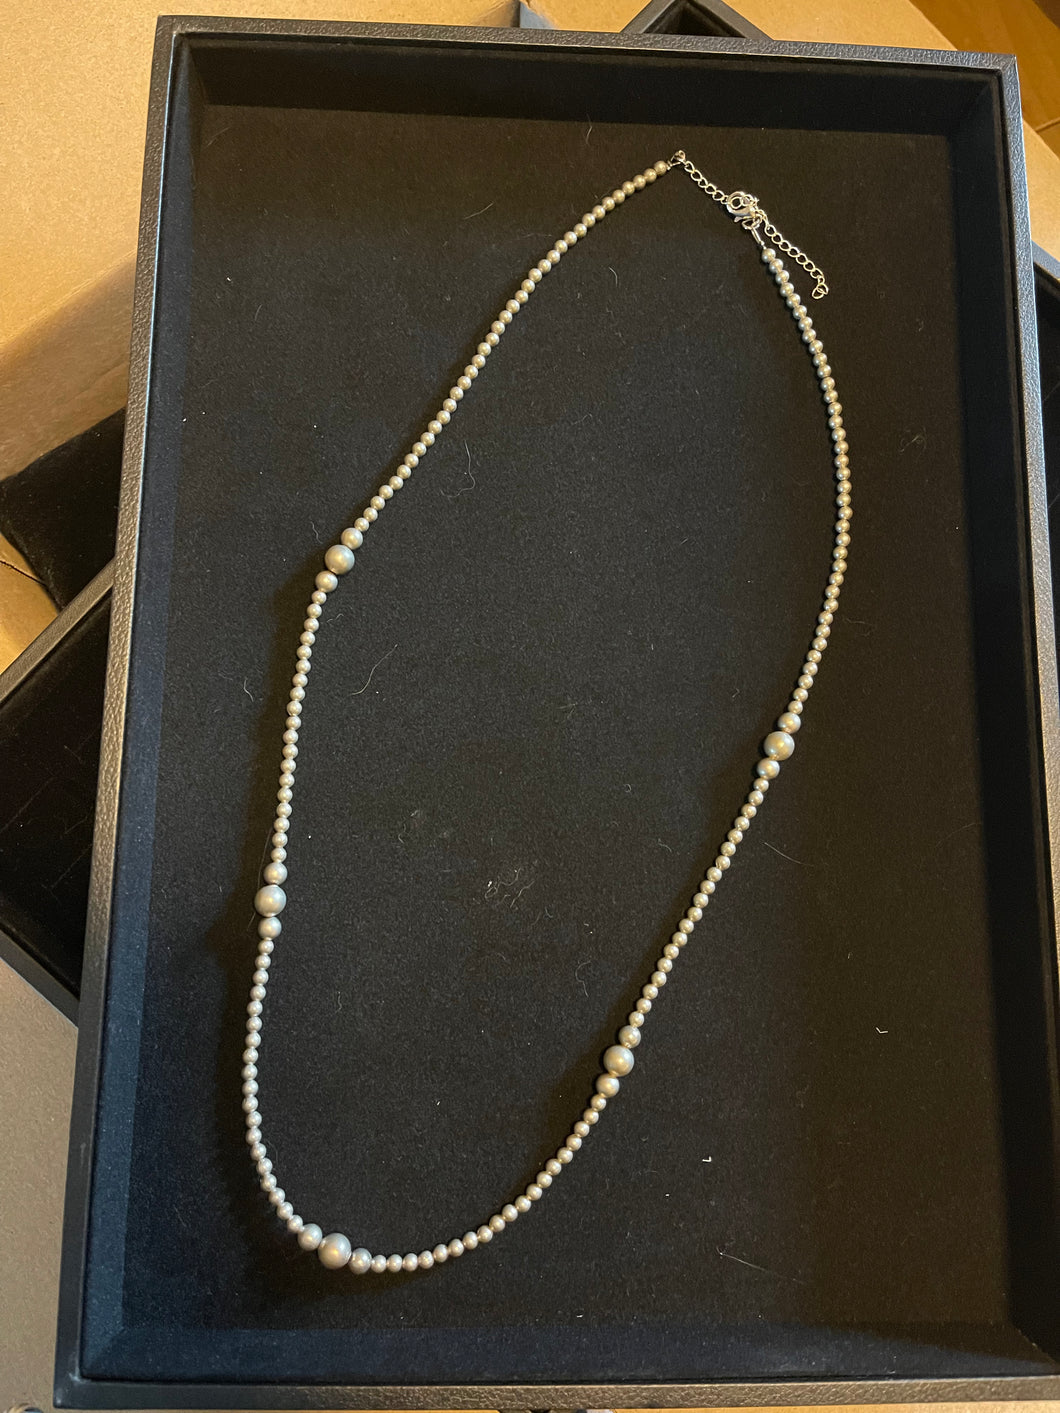 26 Inch Silver beads Necklace graduated